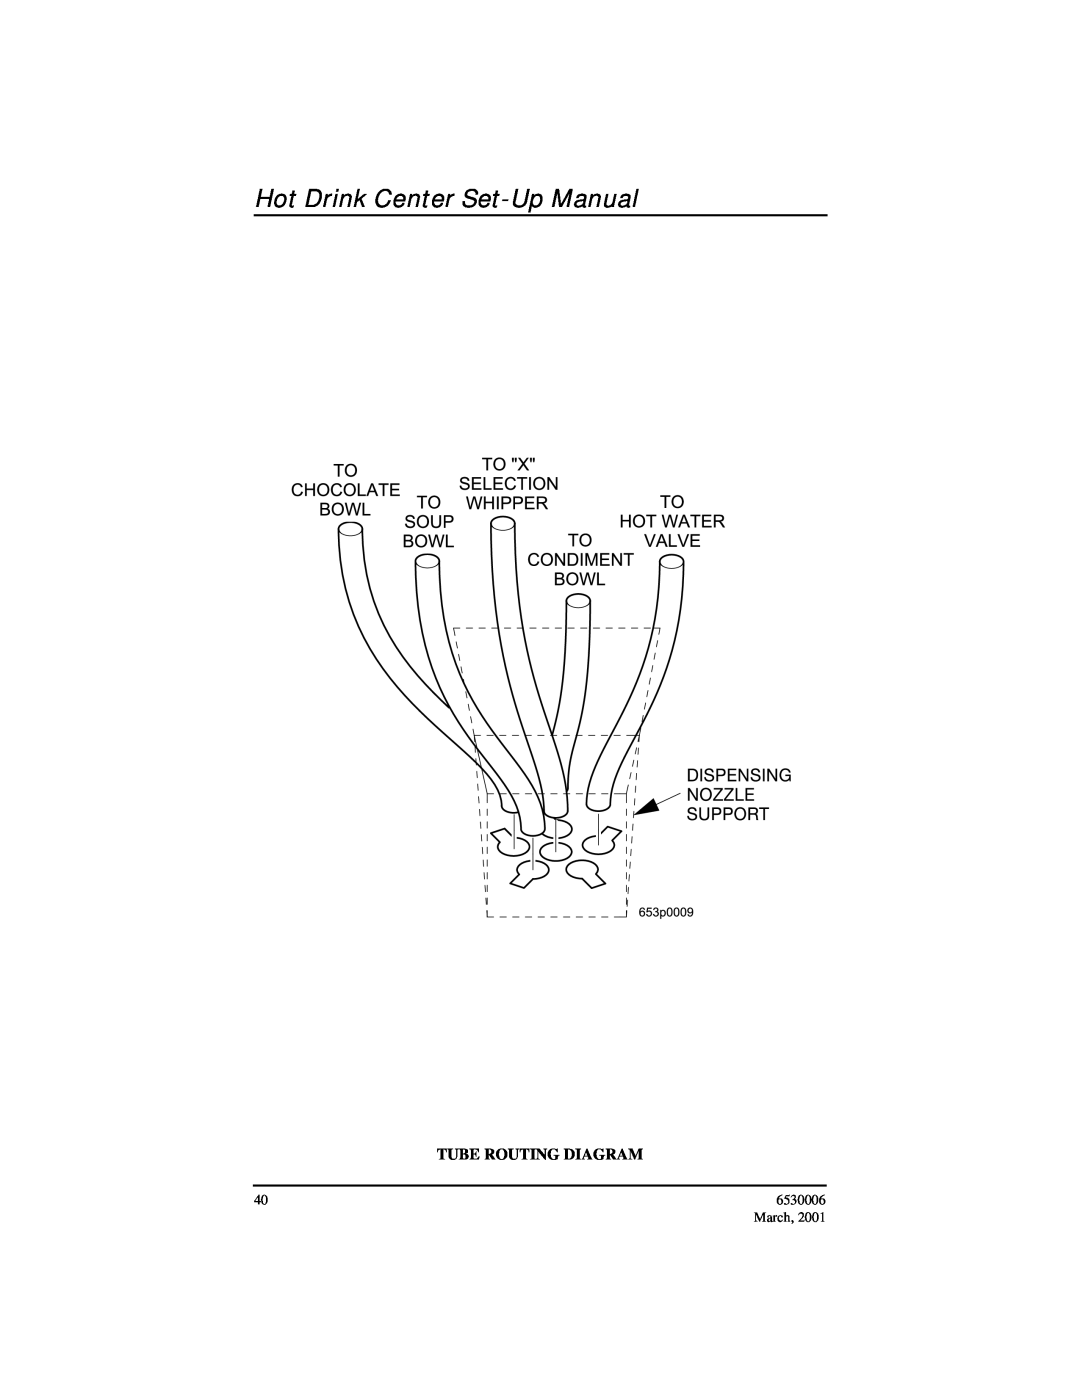 Crane Merchandising Systems manual Hot Drink Center Set-Up Manual, Tube Routing Diagram, 6530006, March 